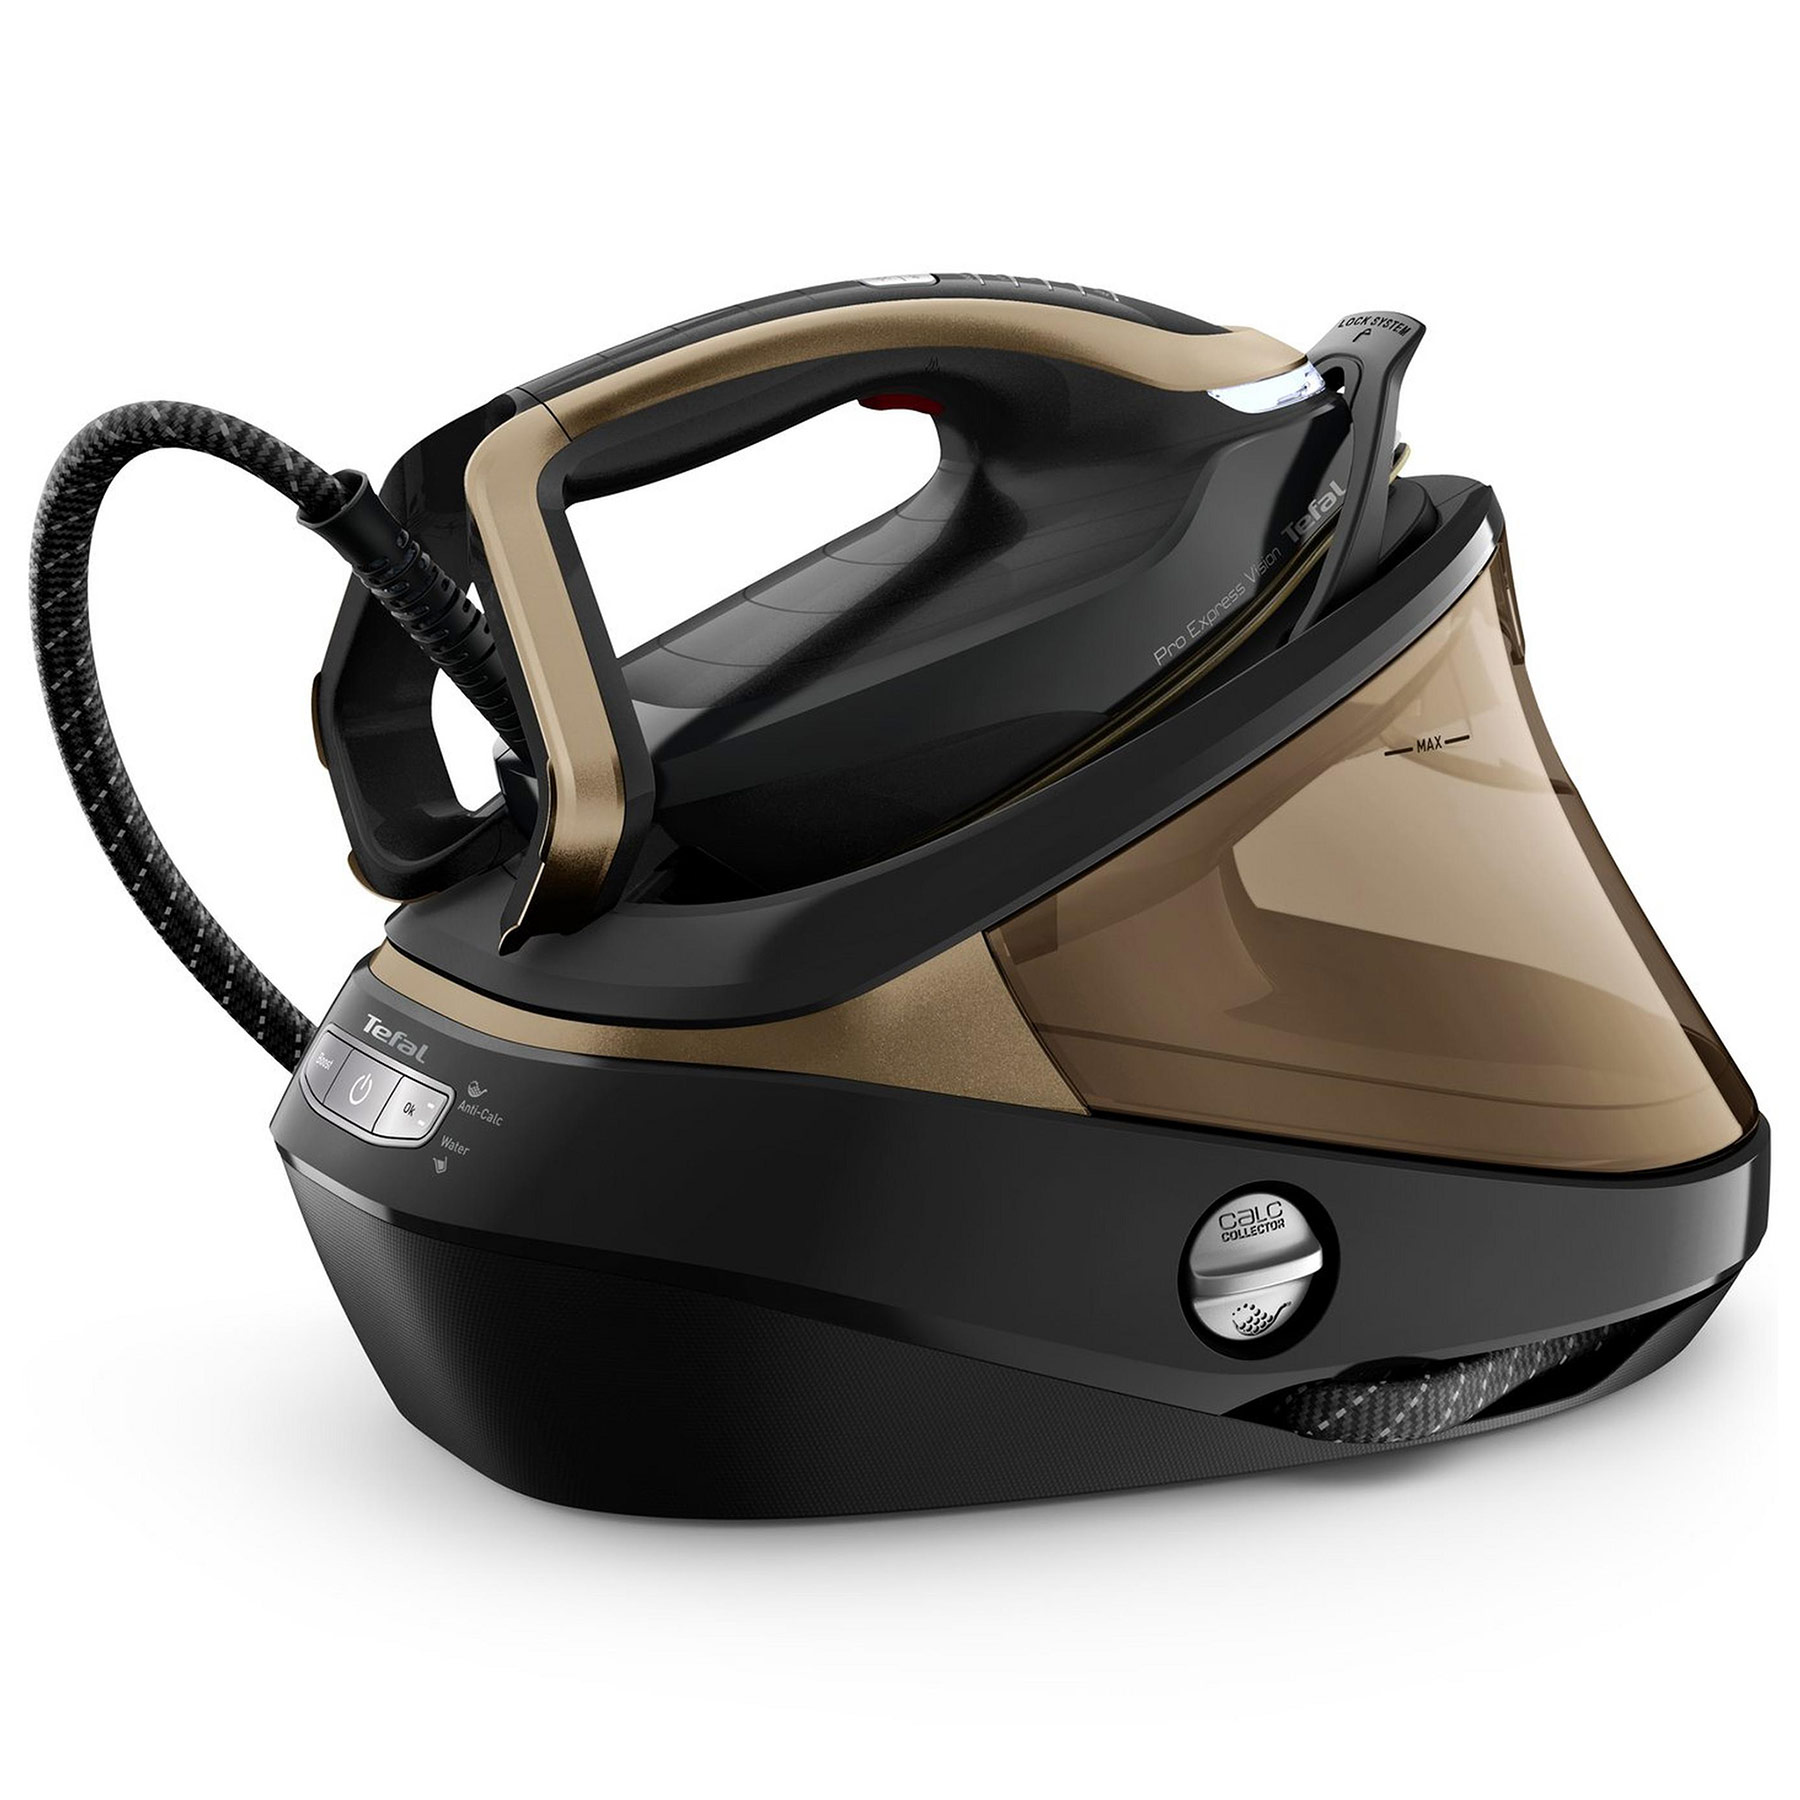 Tefal GV9820G0 Pro Express Vision Anti Scale Steam Generator Iron